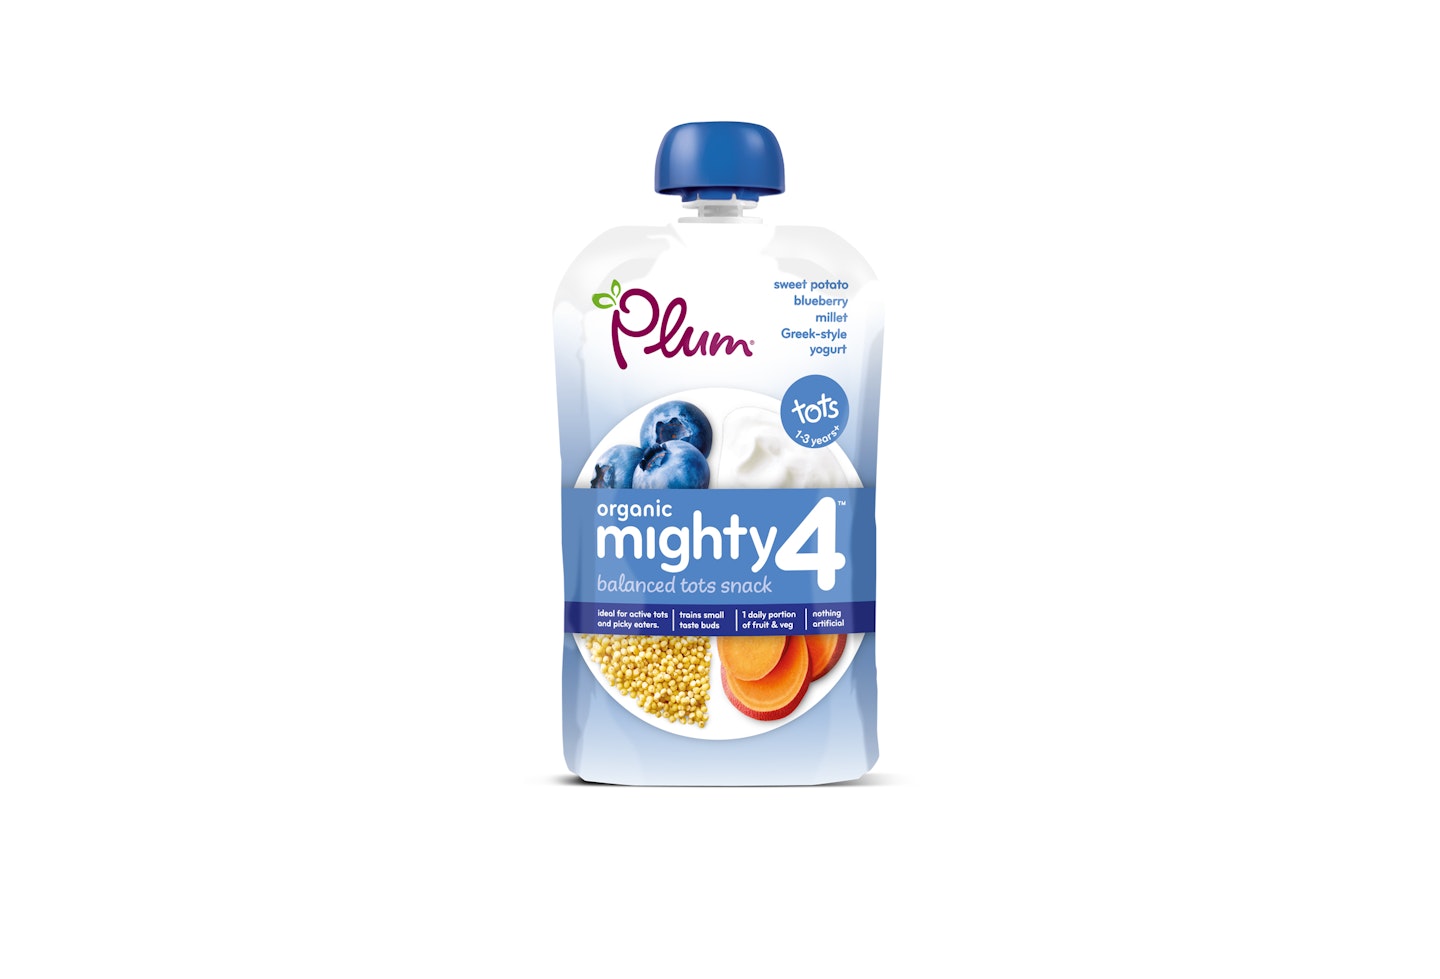 Plum Mighty 4 Pouch, £1.19